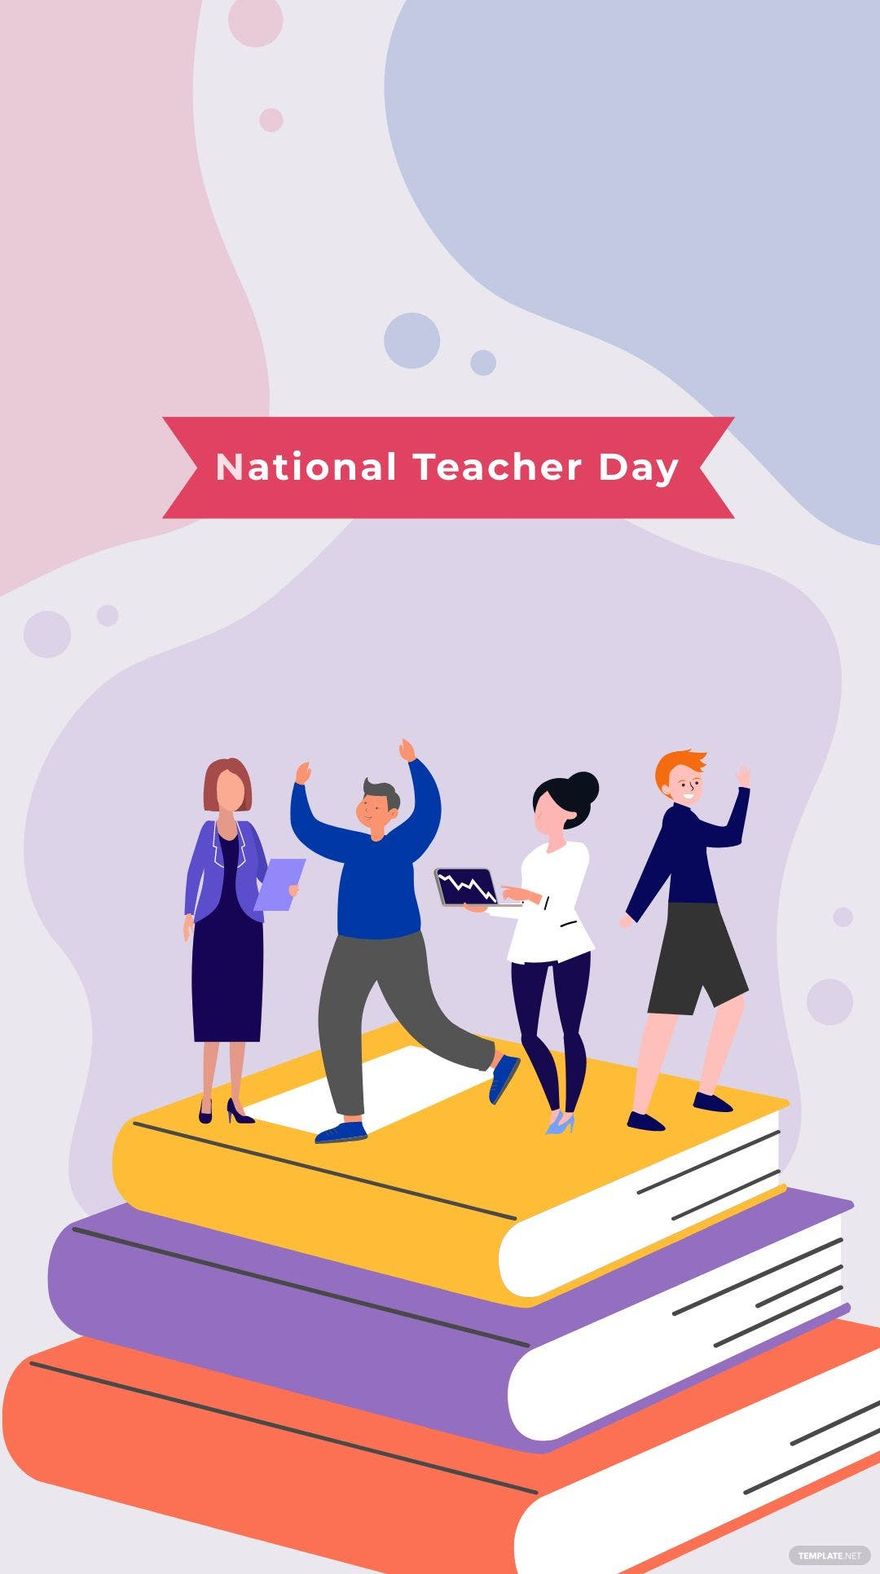 Free National Teacher Day iPhone Background in PDF, Illustrator, PSD, EPS, SVG, JPG, PNG